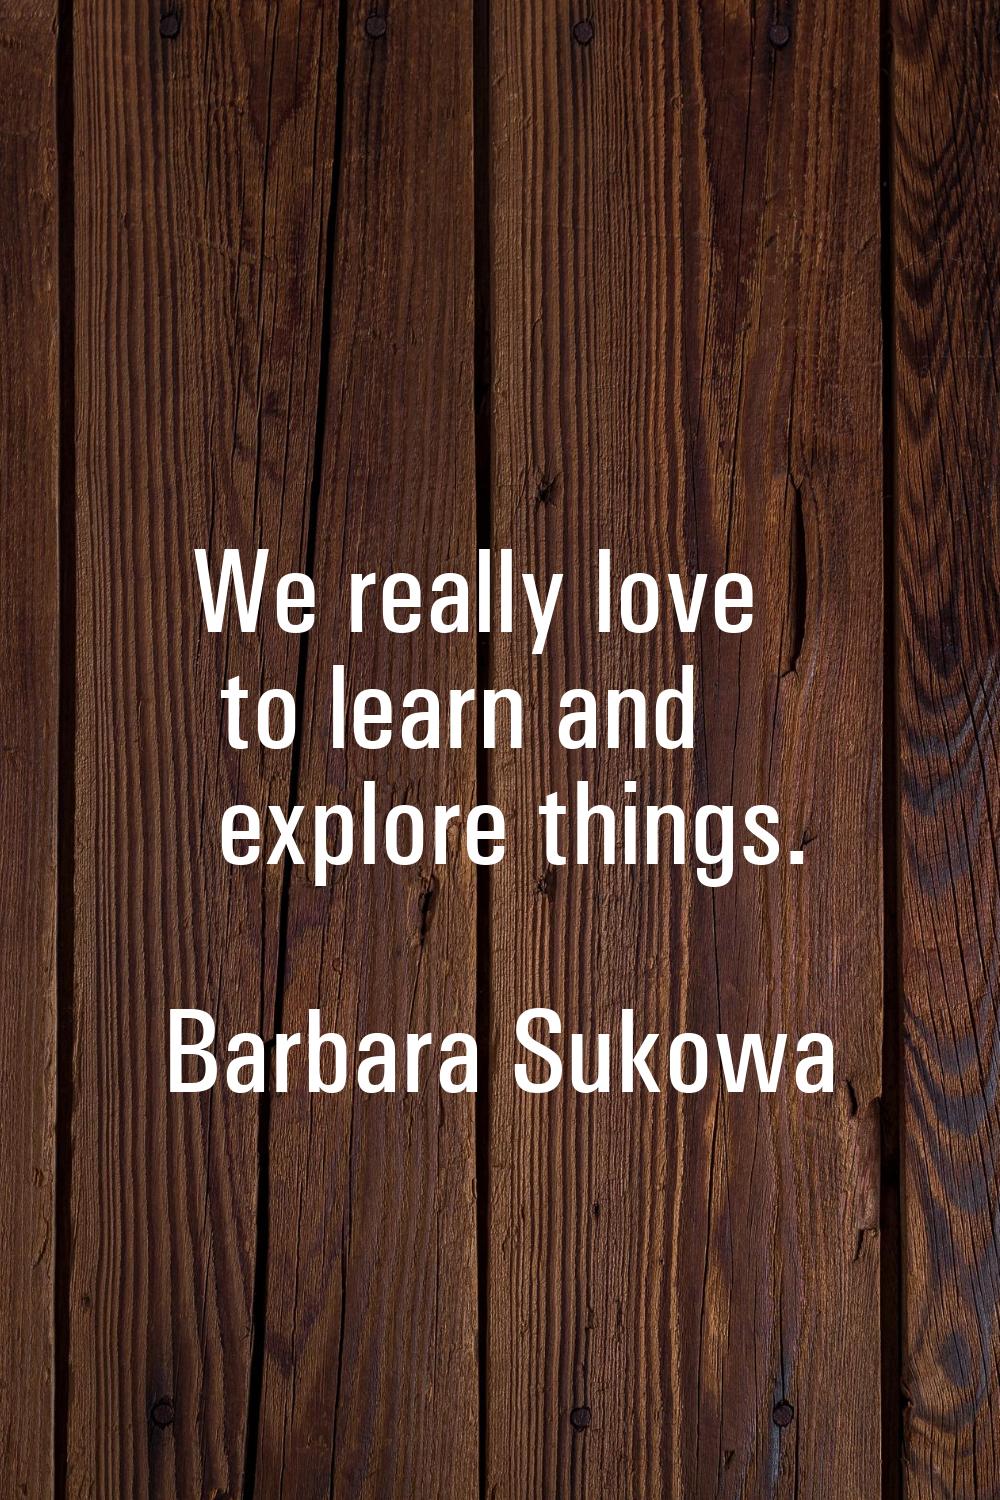 We really love to learn and explore things.